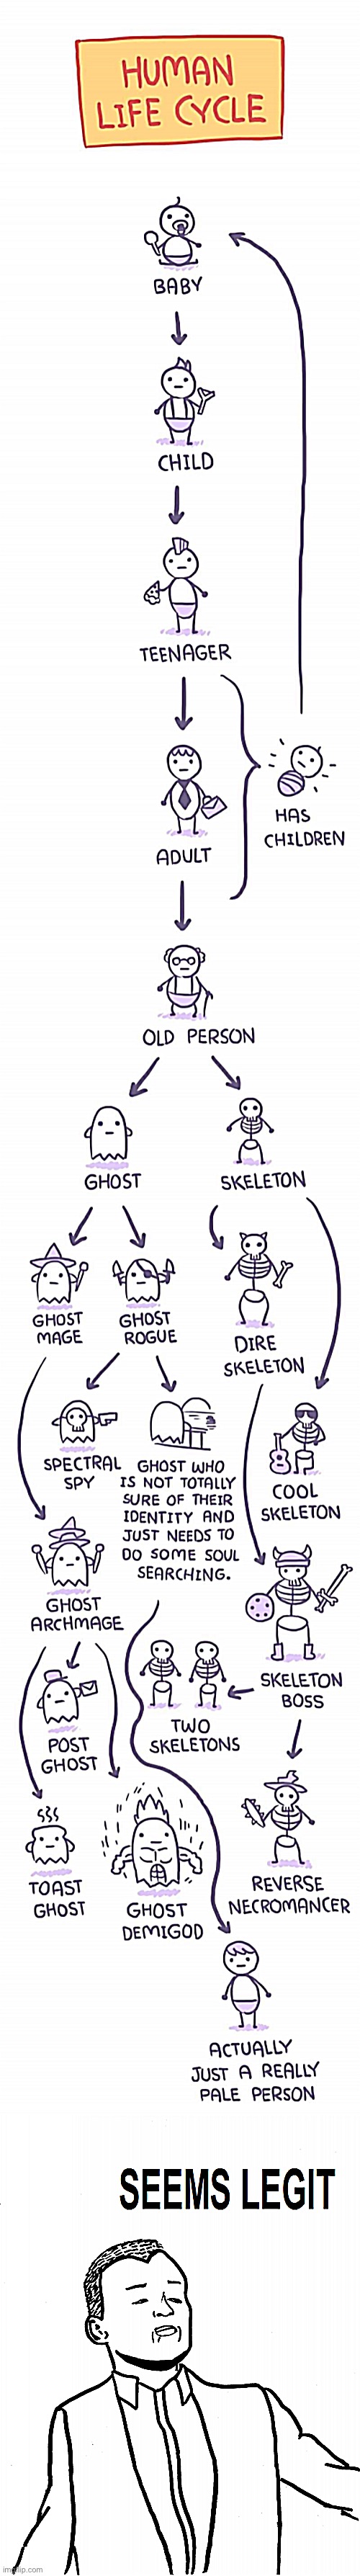 Seems legit | image tagged in human life cycle,seems legit,ghost,life,comics/cartoons,cartoon | made w/ Imgflip meme maker